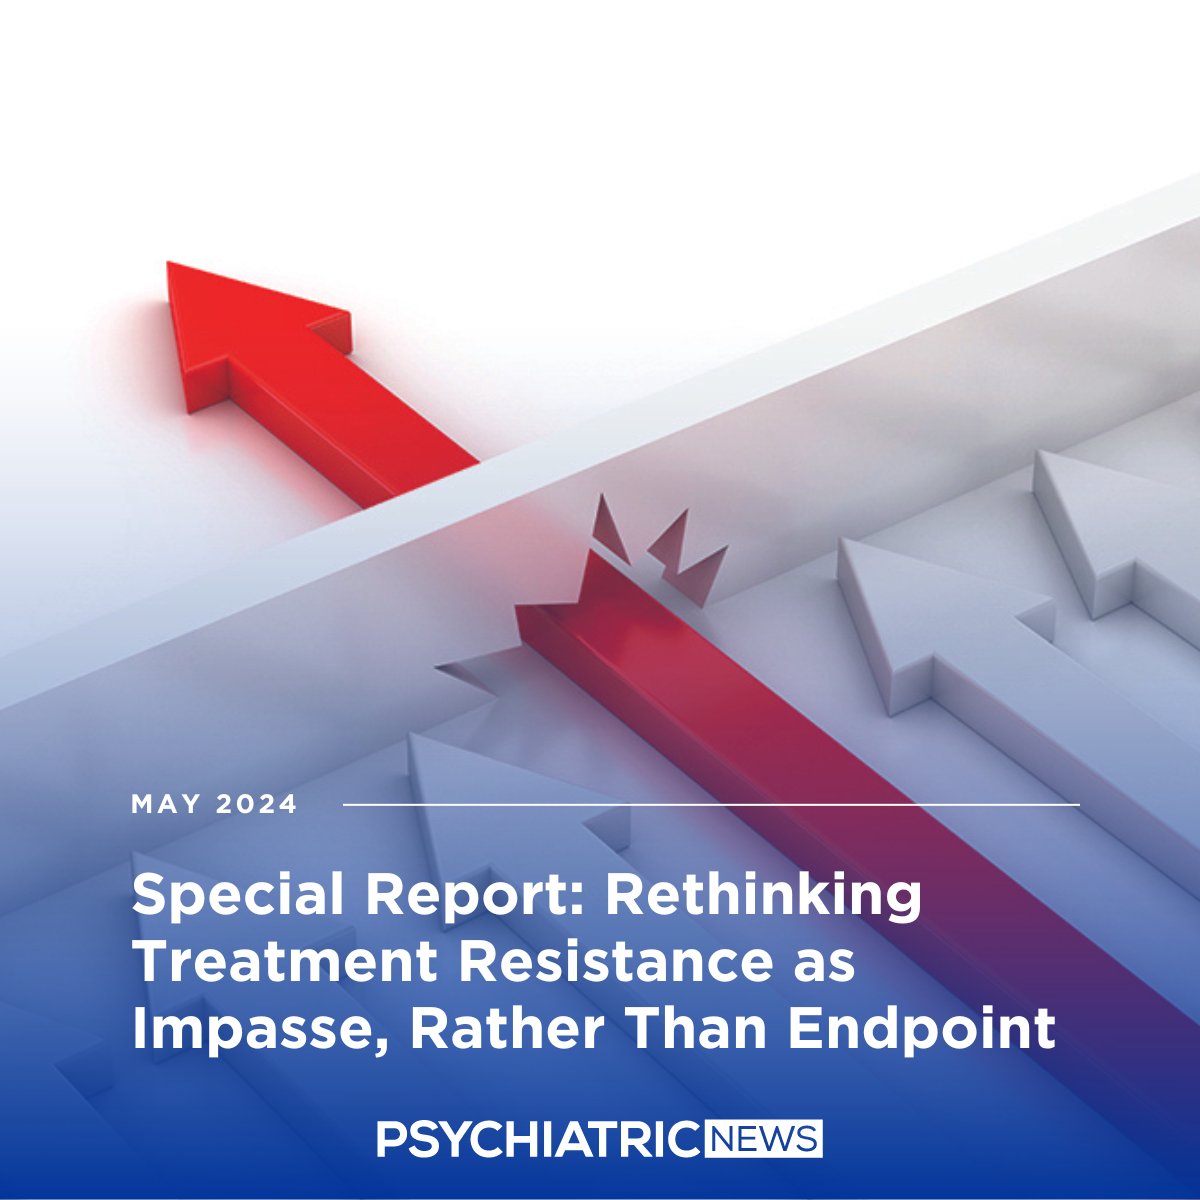 SPECIAL REPORT | When a patient is labeled “treatment resistant,” clinicians are in danger of objectifying and effectively abandoning the patient, along with the sense of hope that practitioners and patients should be sharing. ow.ly/tSXE50RHnVx